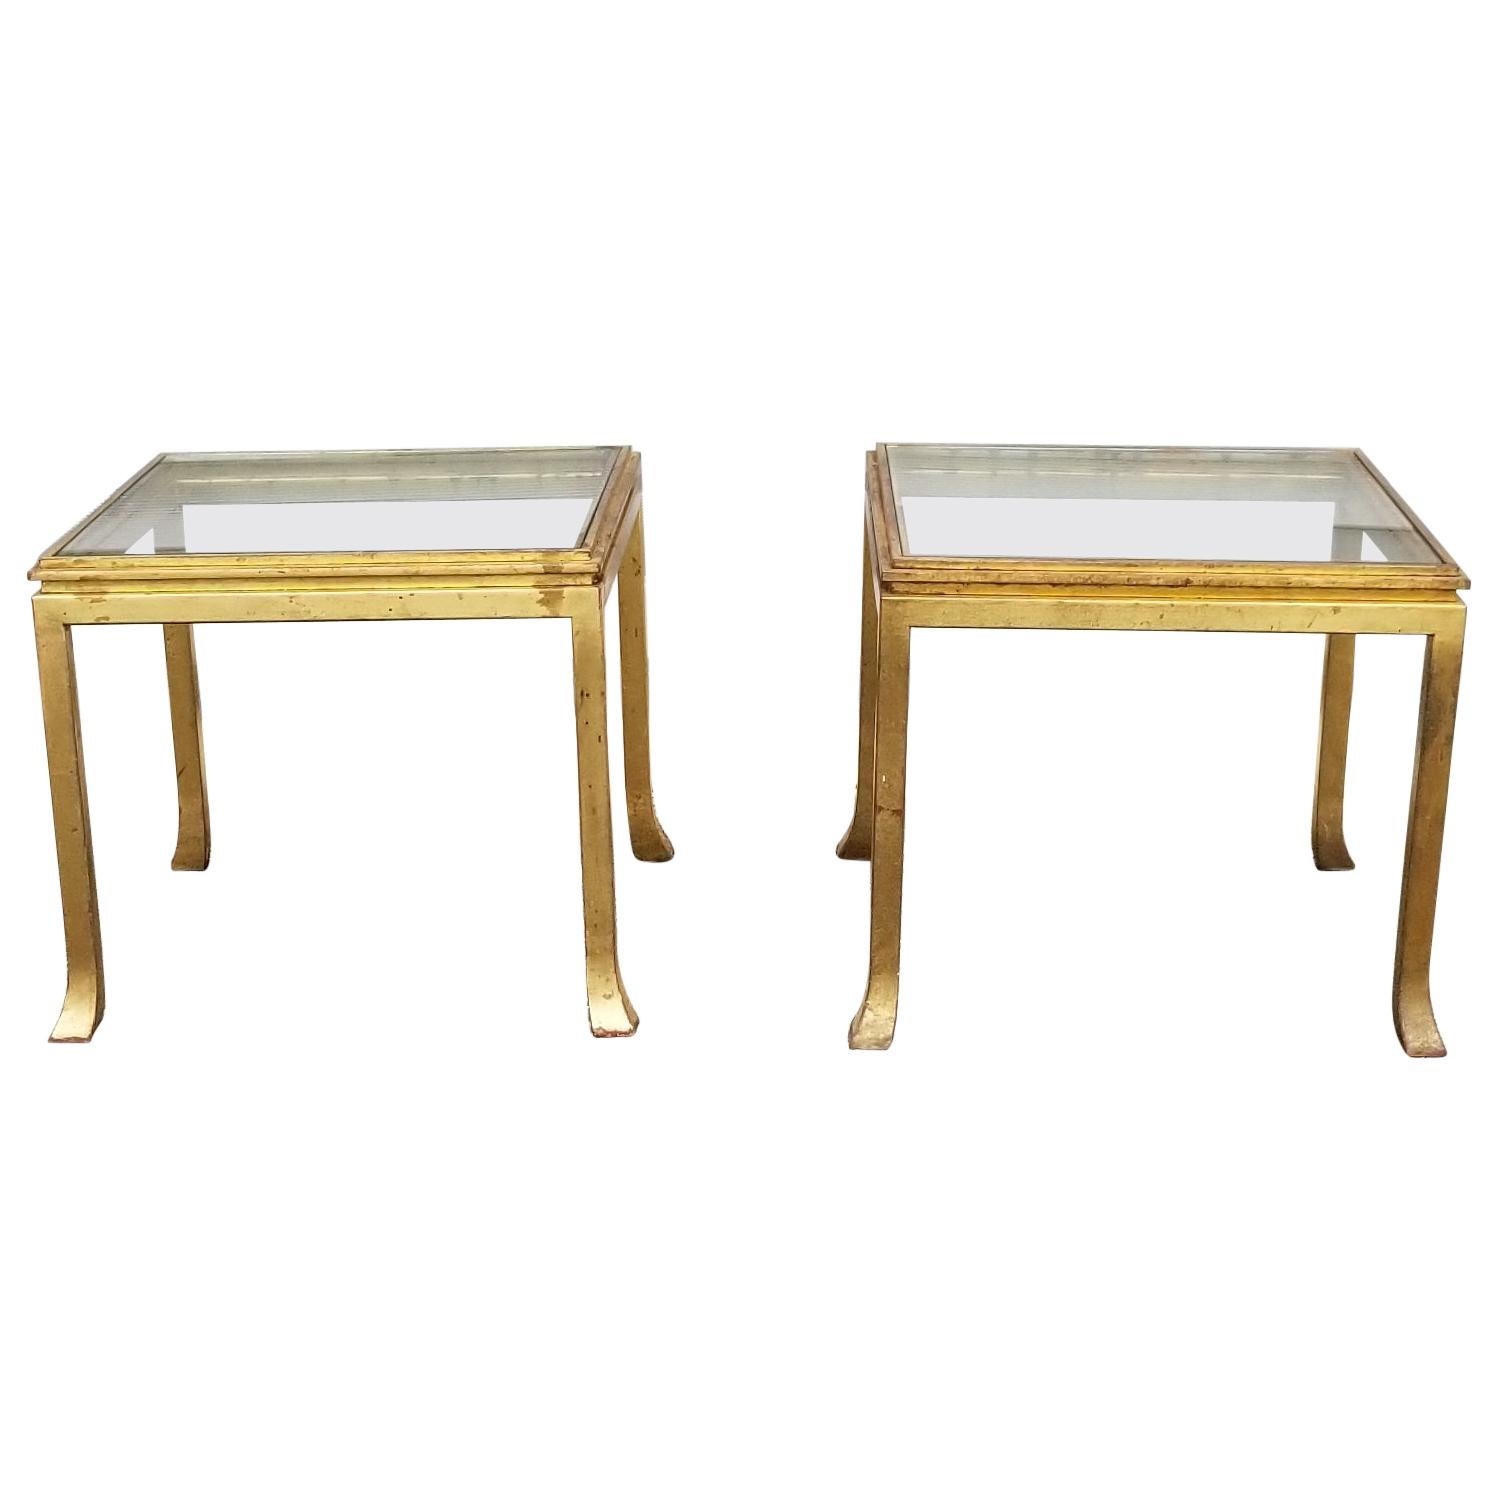 Pair of Gold Leaf Solid Steel End Tables by Maison Ramsay, France, 1970s